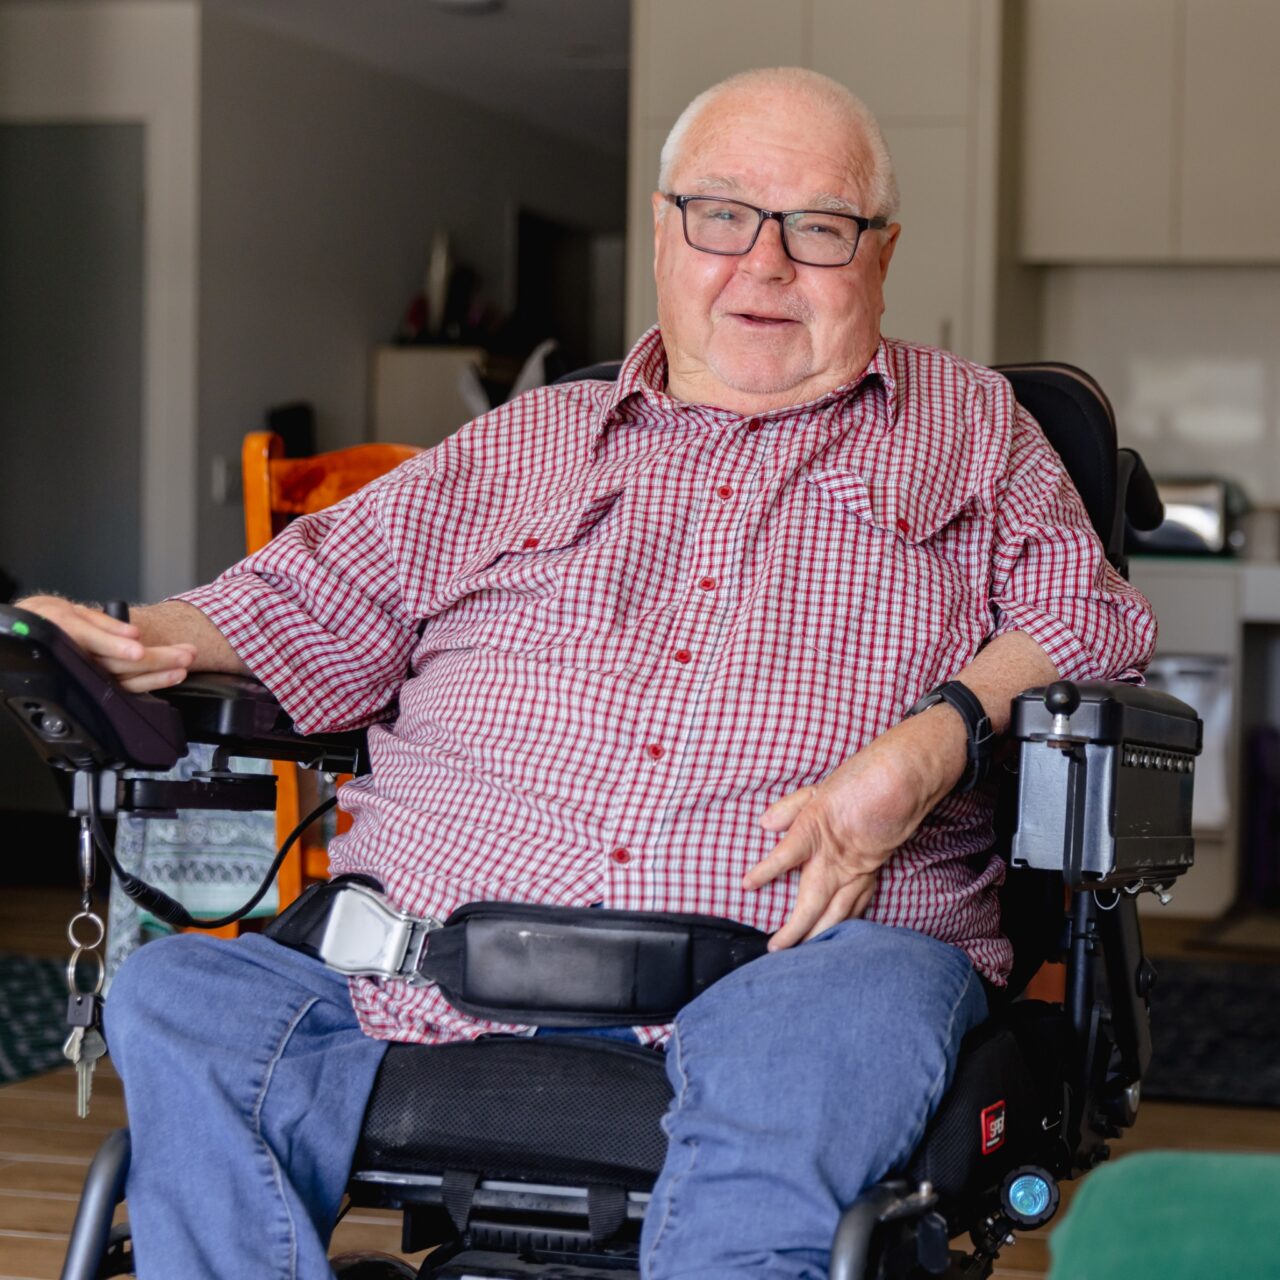 an older man sitting in a wheel chair holding a remote.